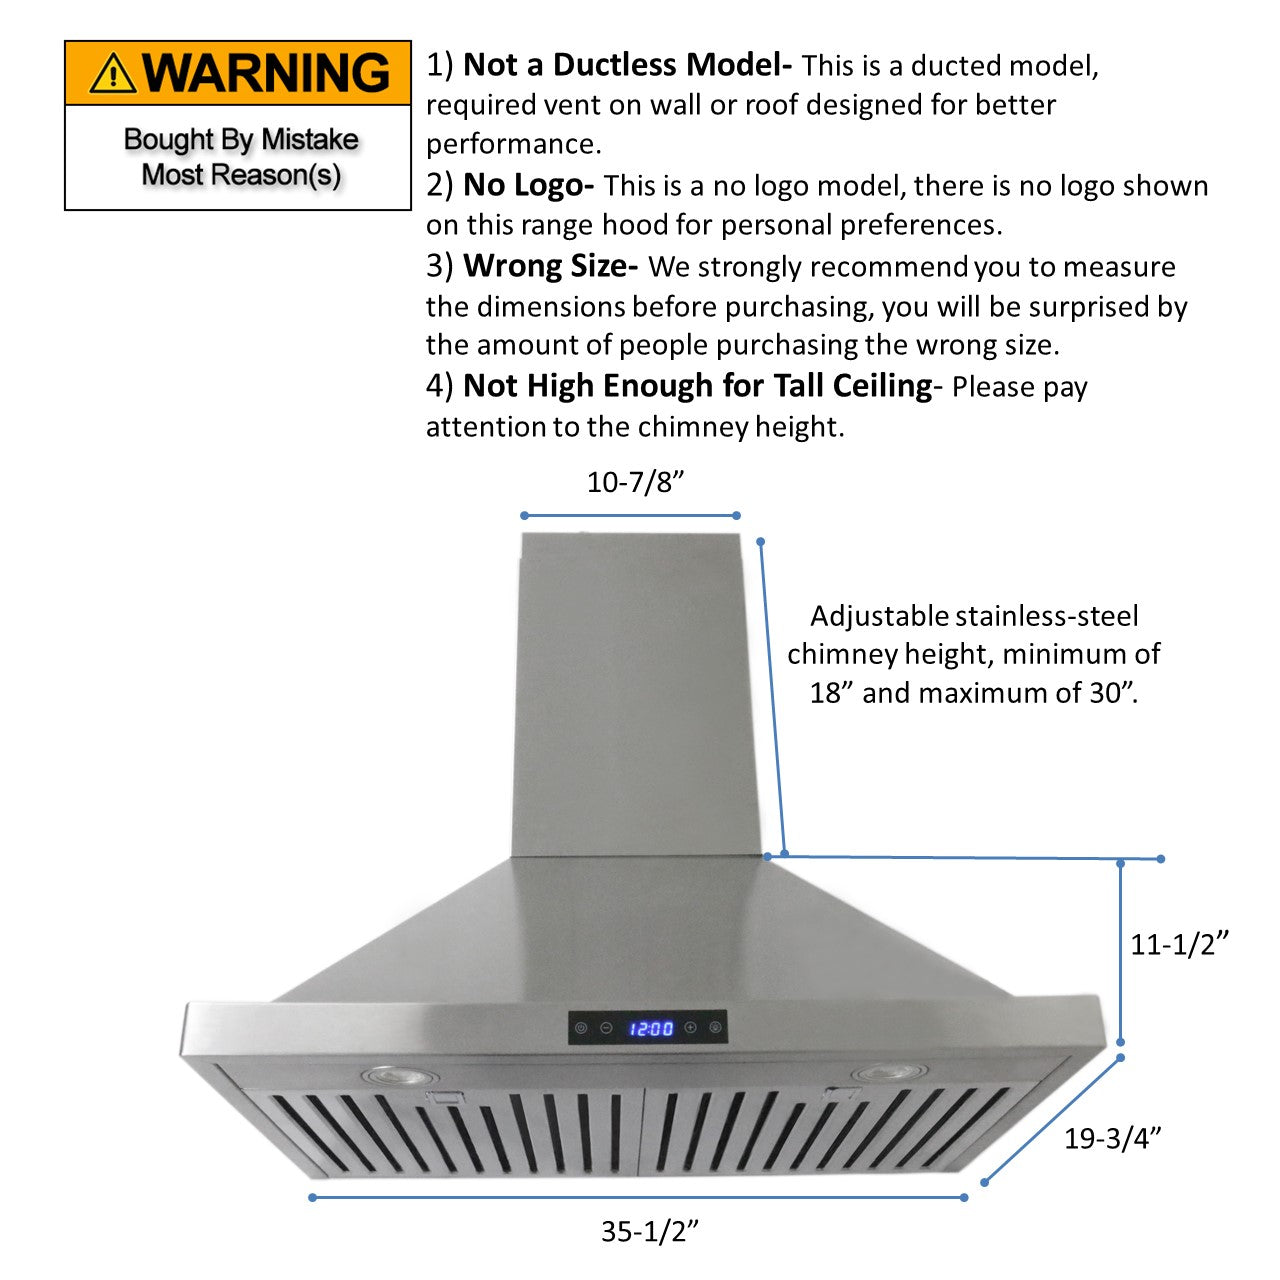 Leyso RH-WS-36 41.5”H Stainless Steel Range hood 3 Speeds, 6” Round Top Vent 760 CFM, 2 LED Lights, Baffle Filters (36" Wall Mount)